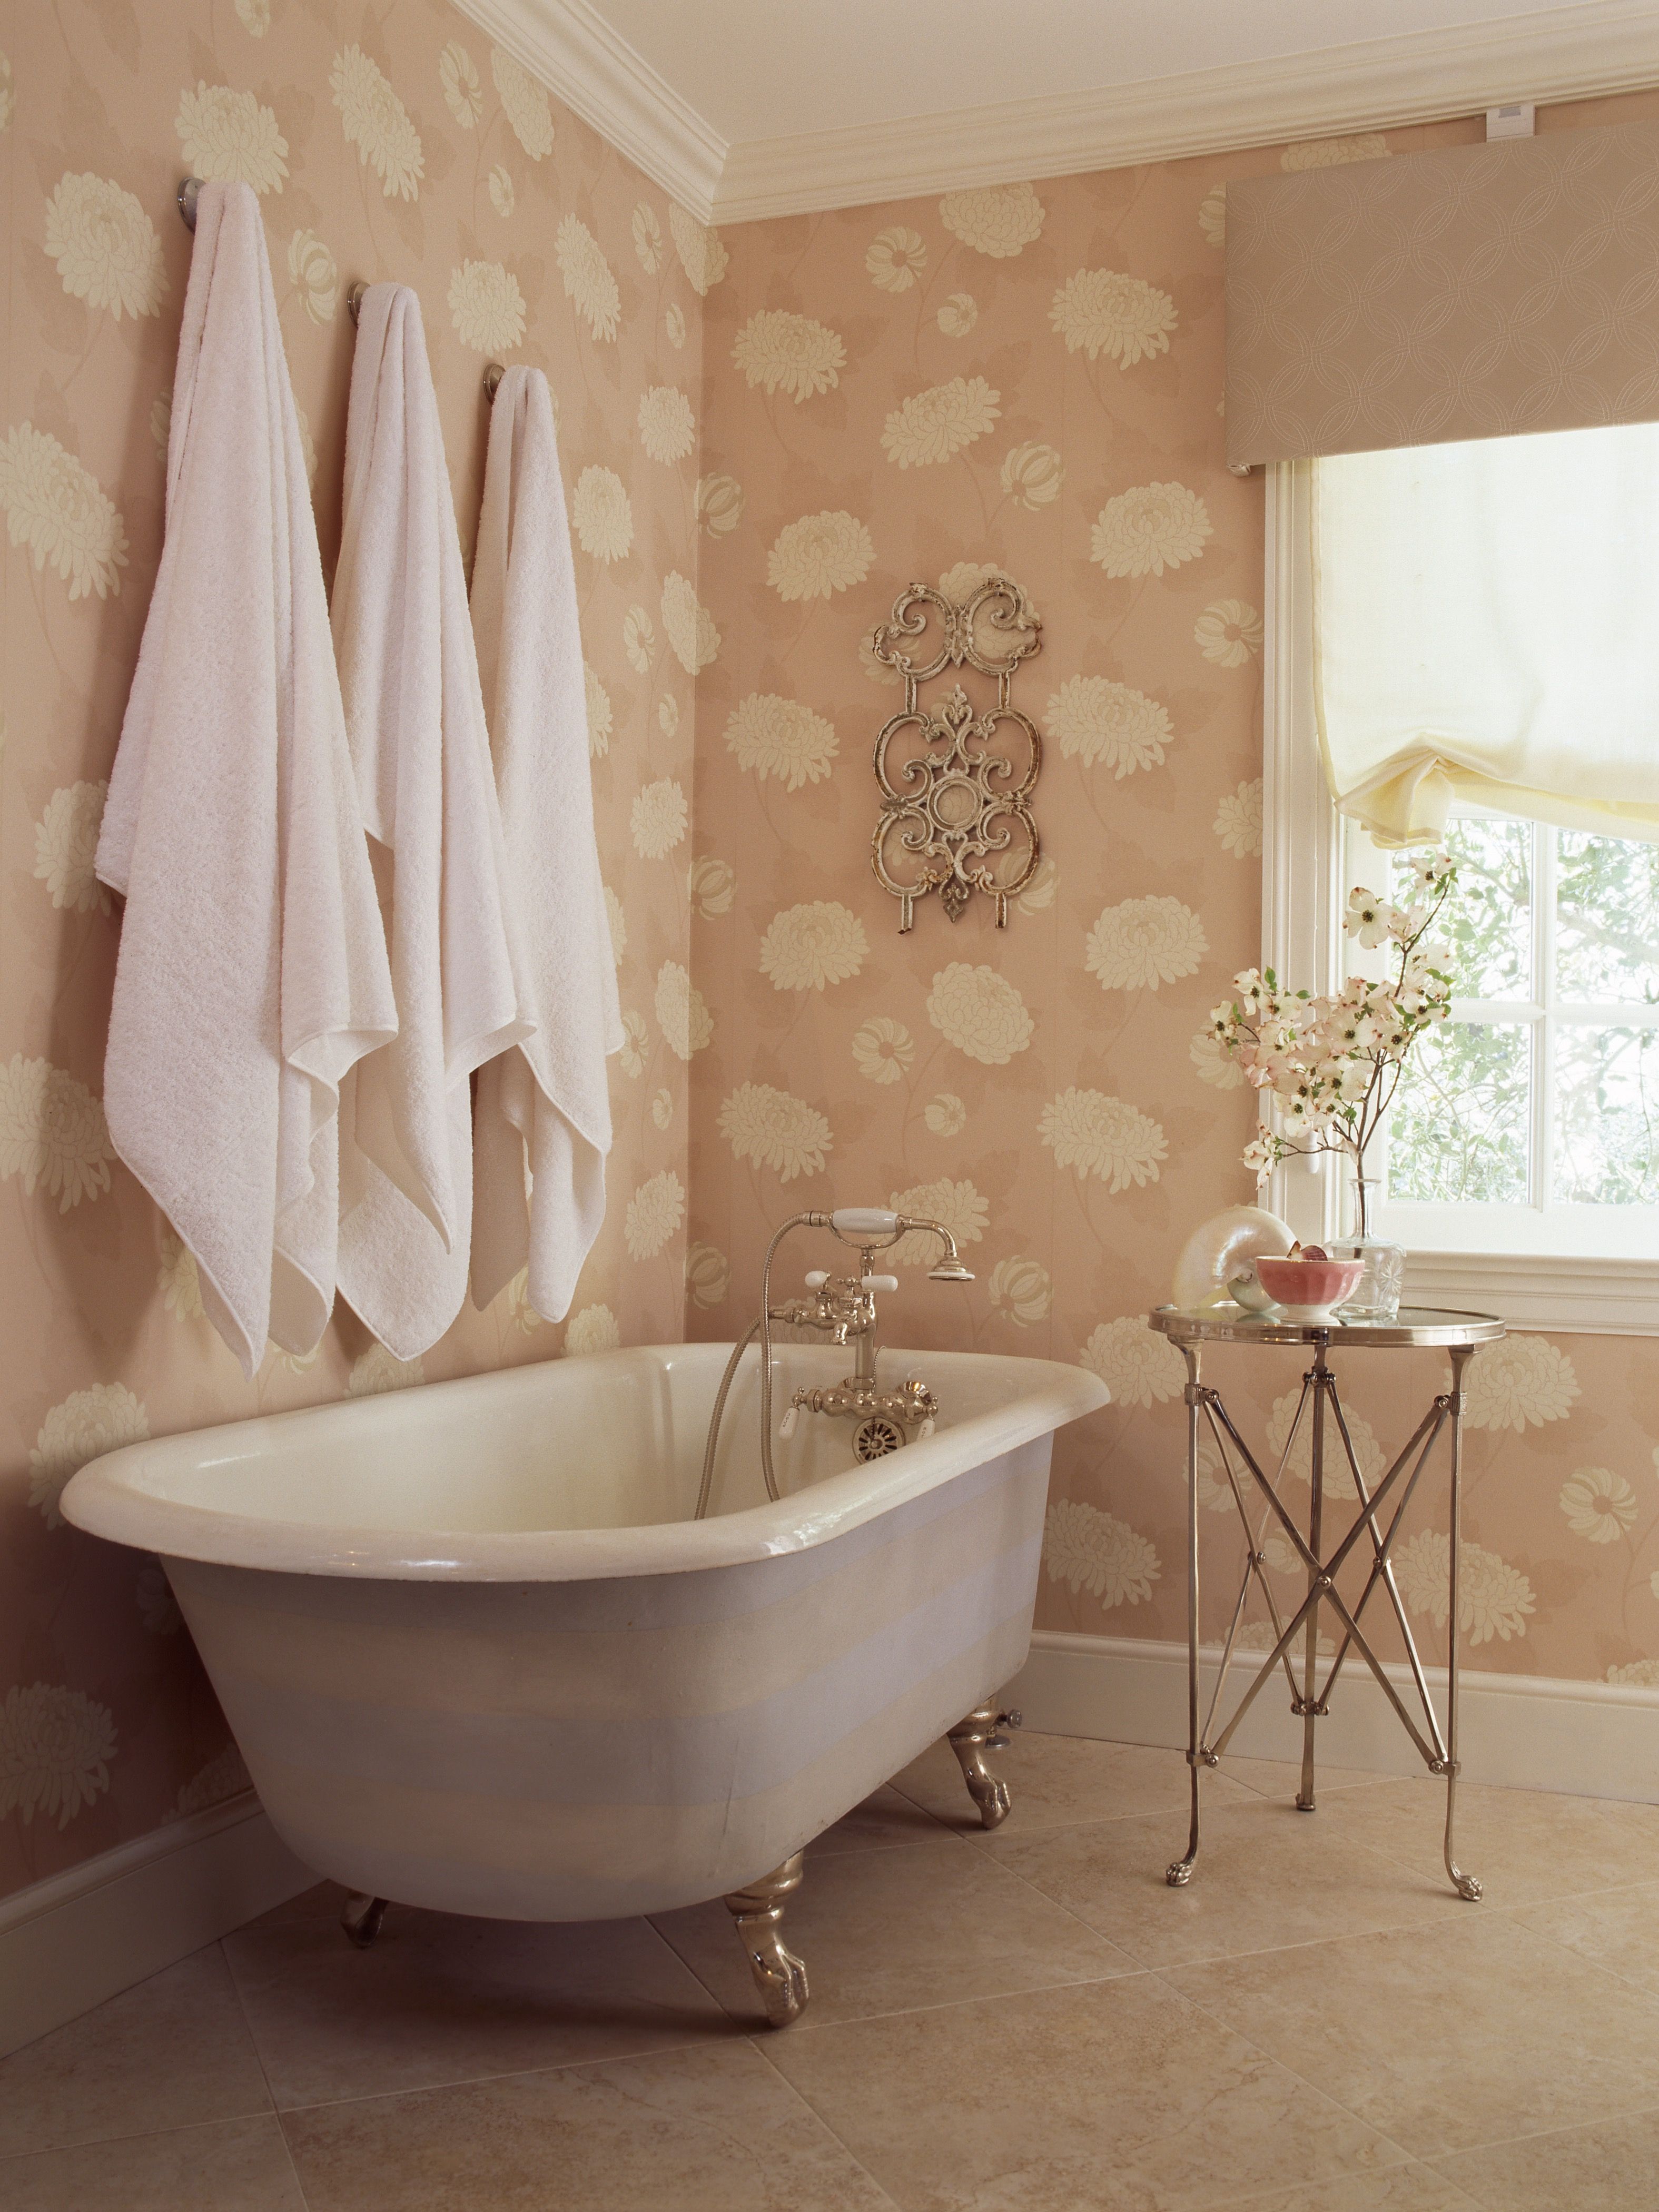 Classic Cottage Style Bathroom With Floral Wall Decoration (View 6 of 29)